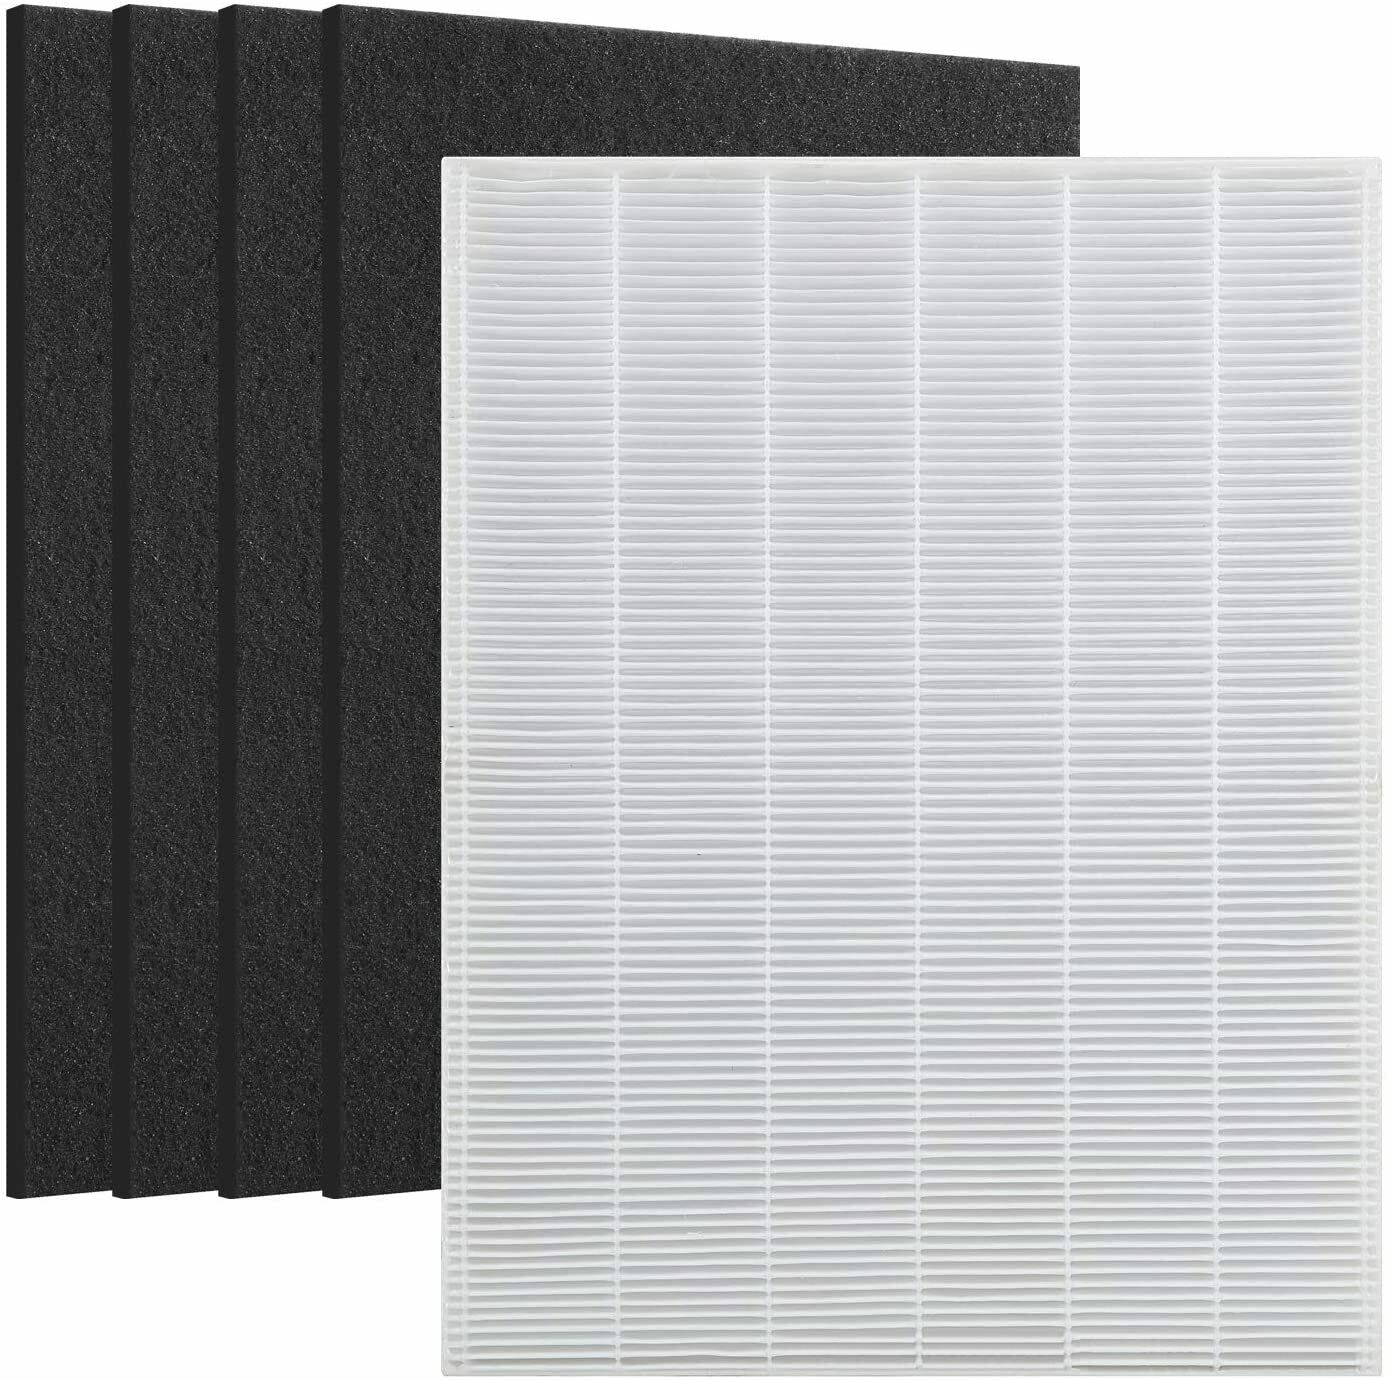 Replace For Winix 115115 Filter + 4 Carbon Filters Plasmawave Size 21 5300 5500